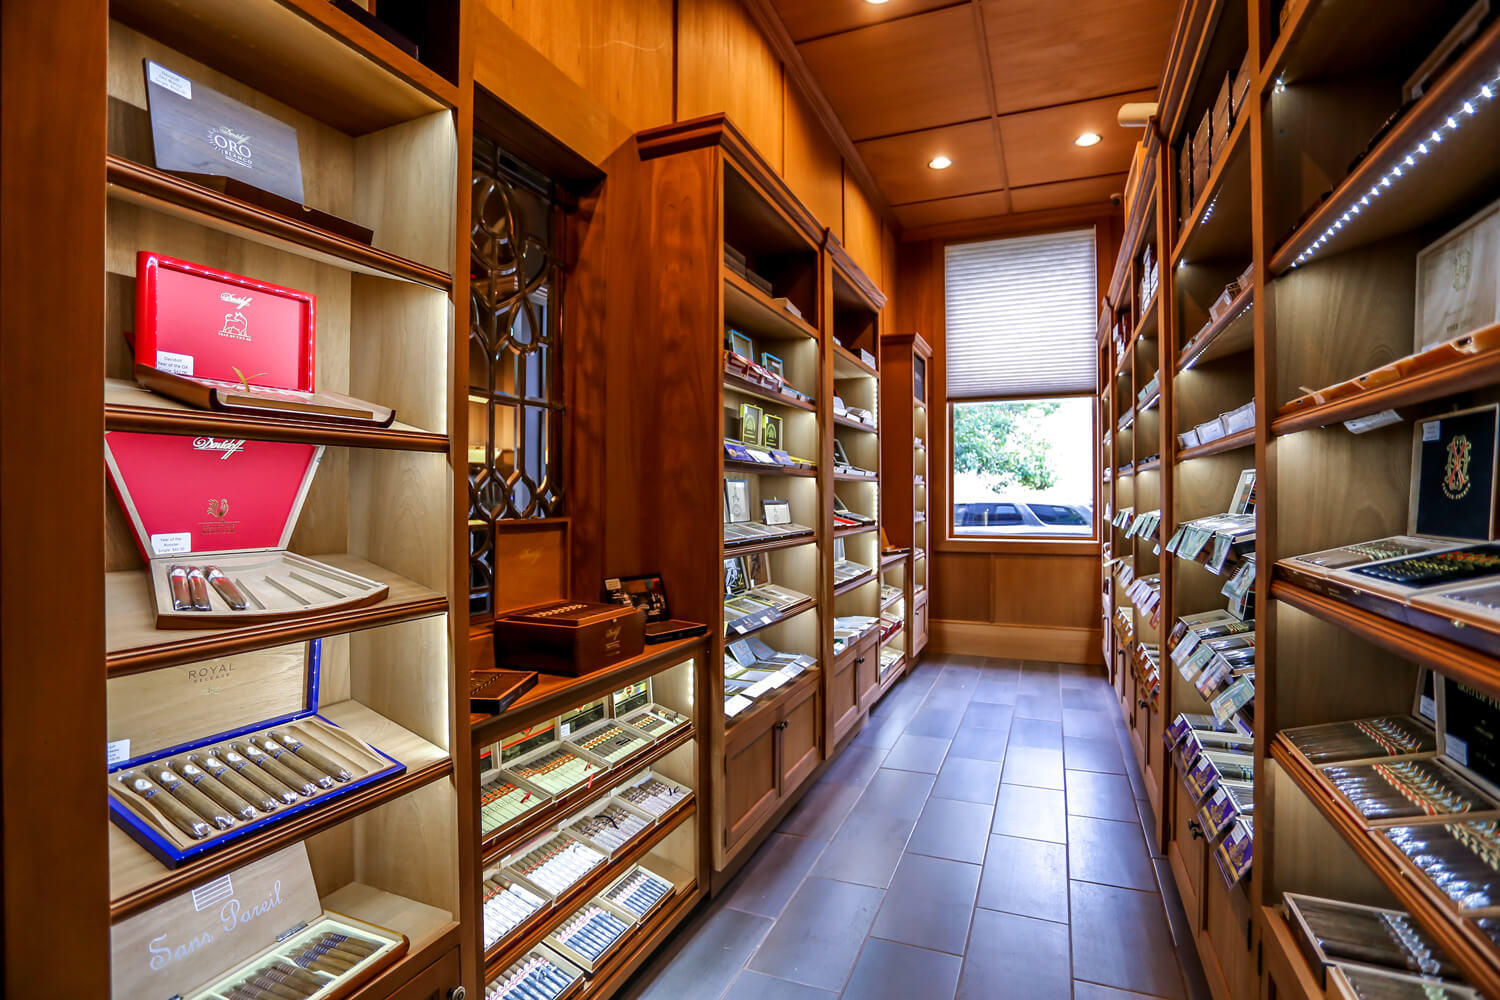 Cigar Store - Humidor - Designed by Foshee Architecture